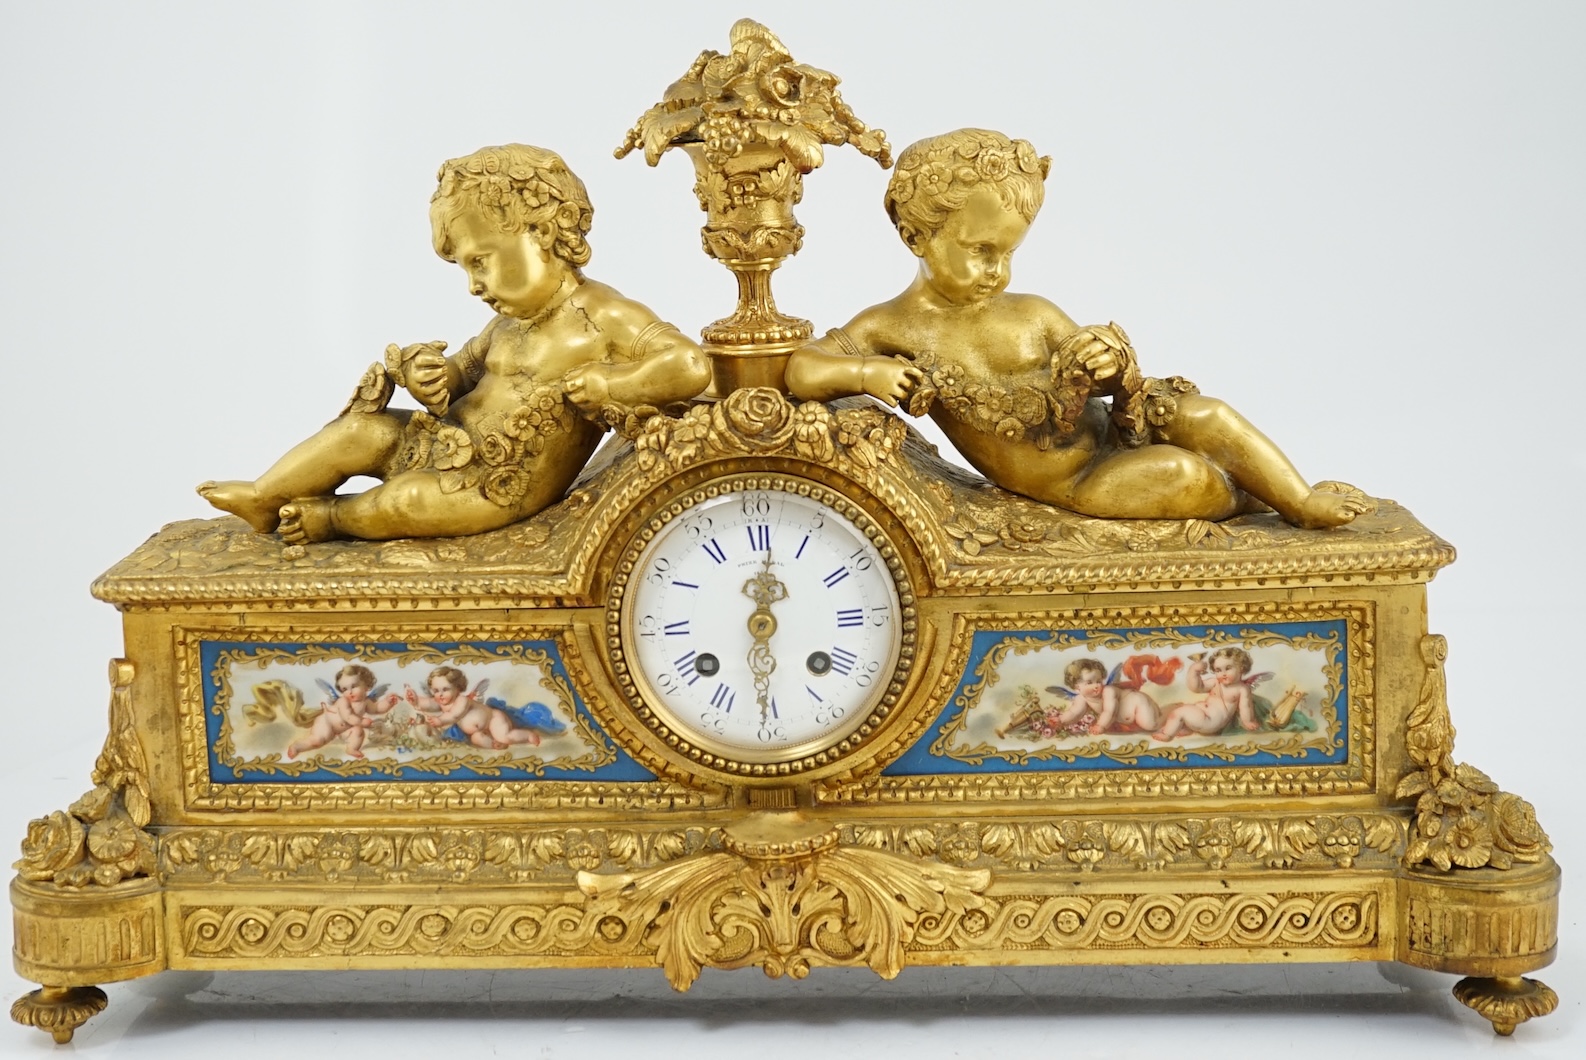 A 19th century French ormolu and Sevres style porcelain mantel clock